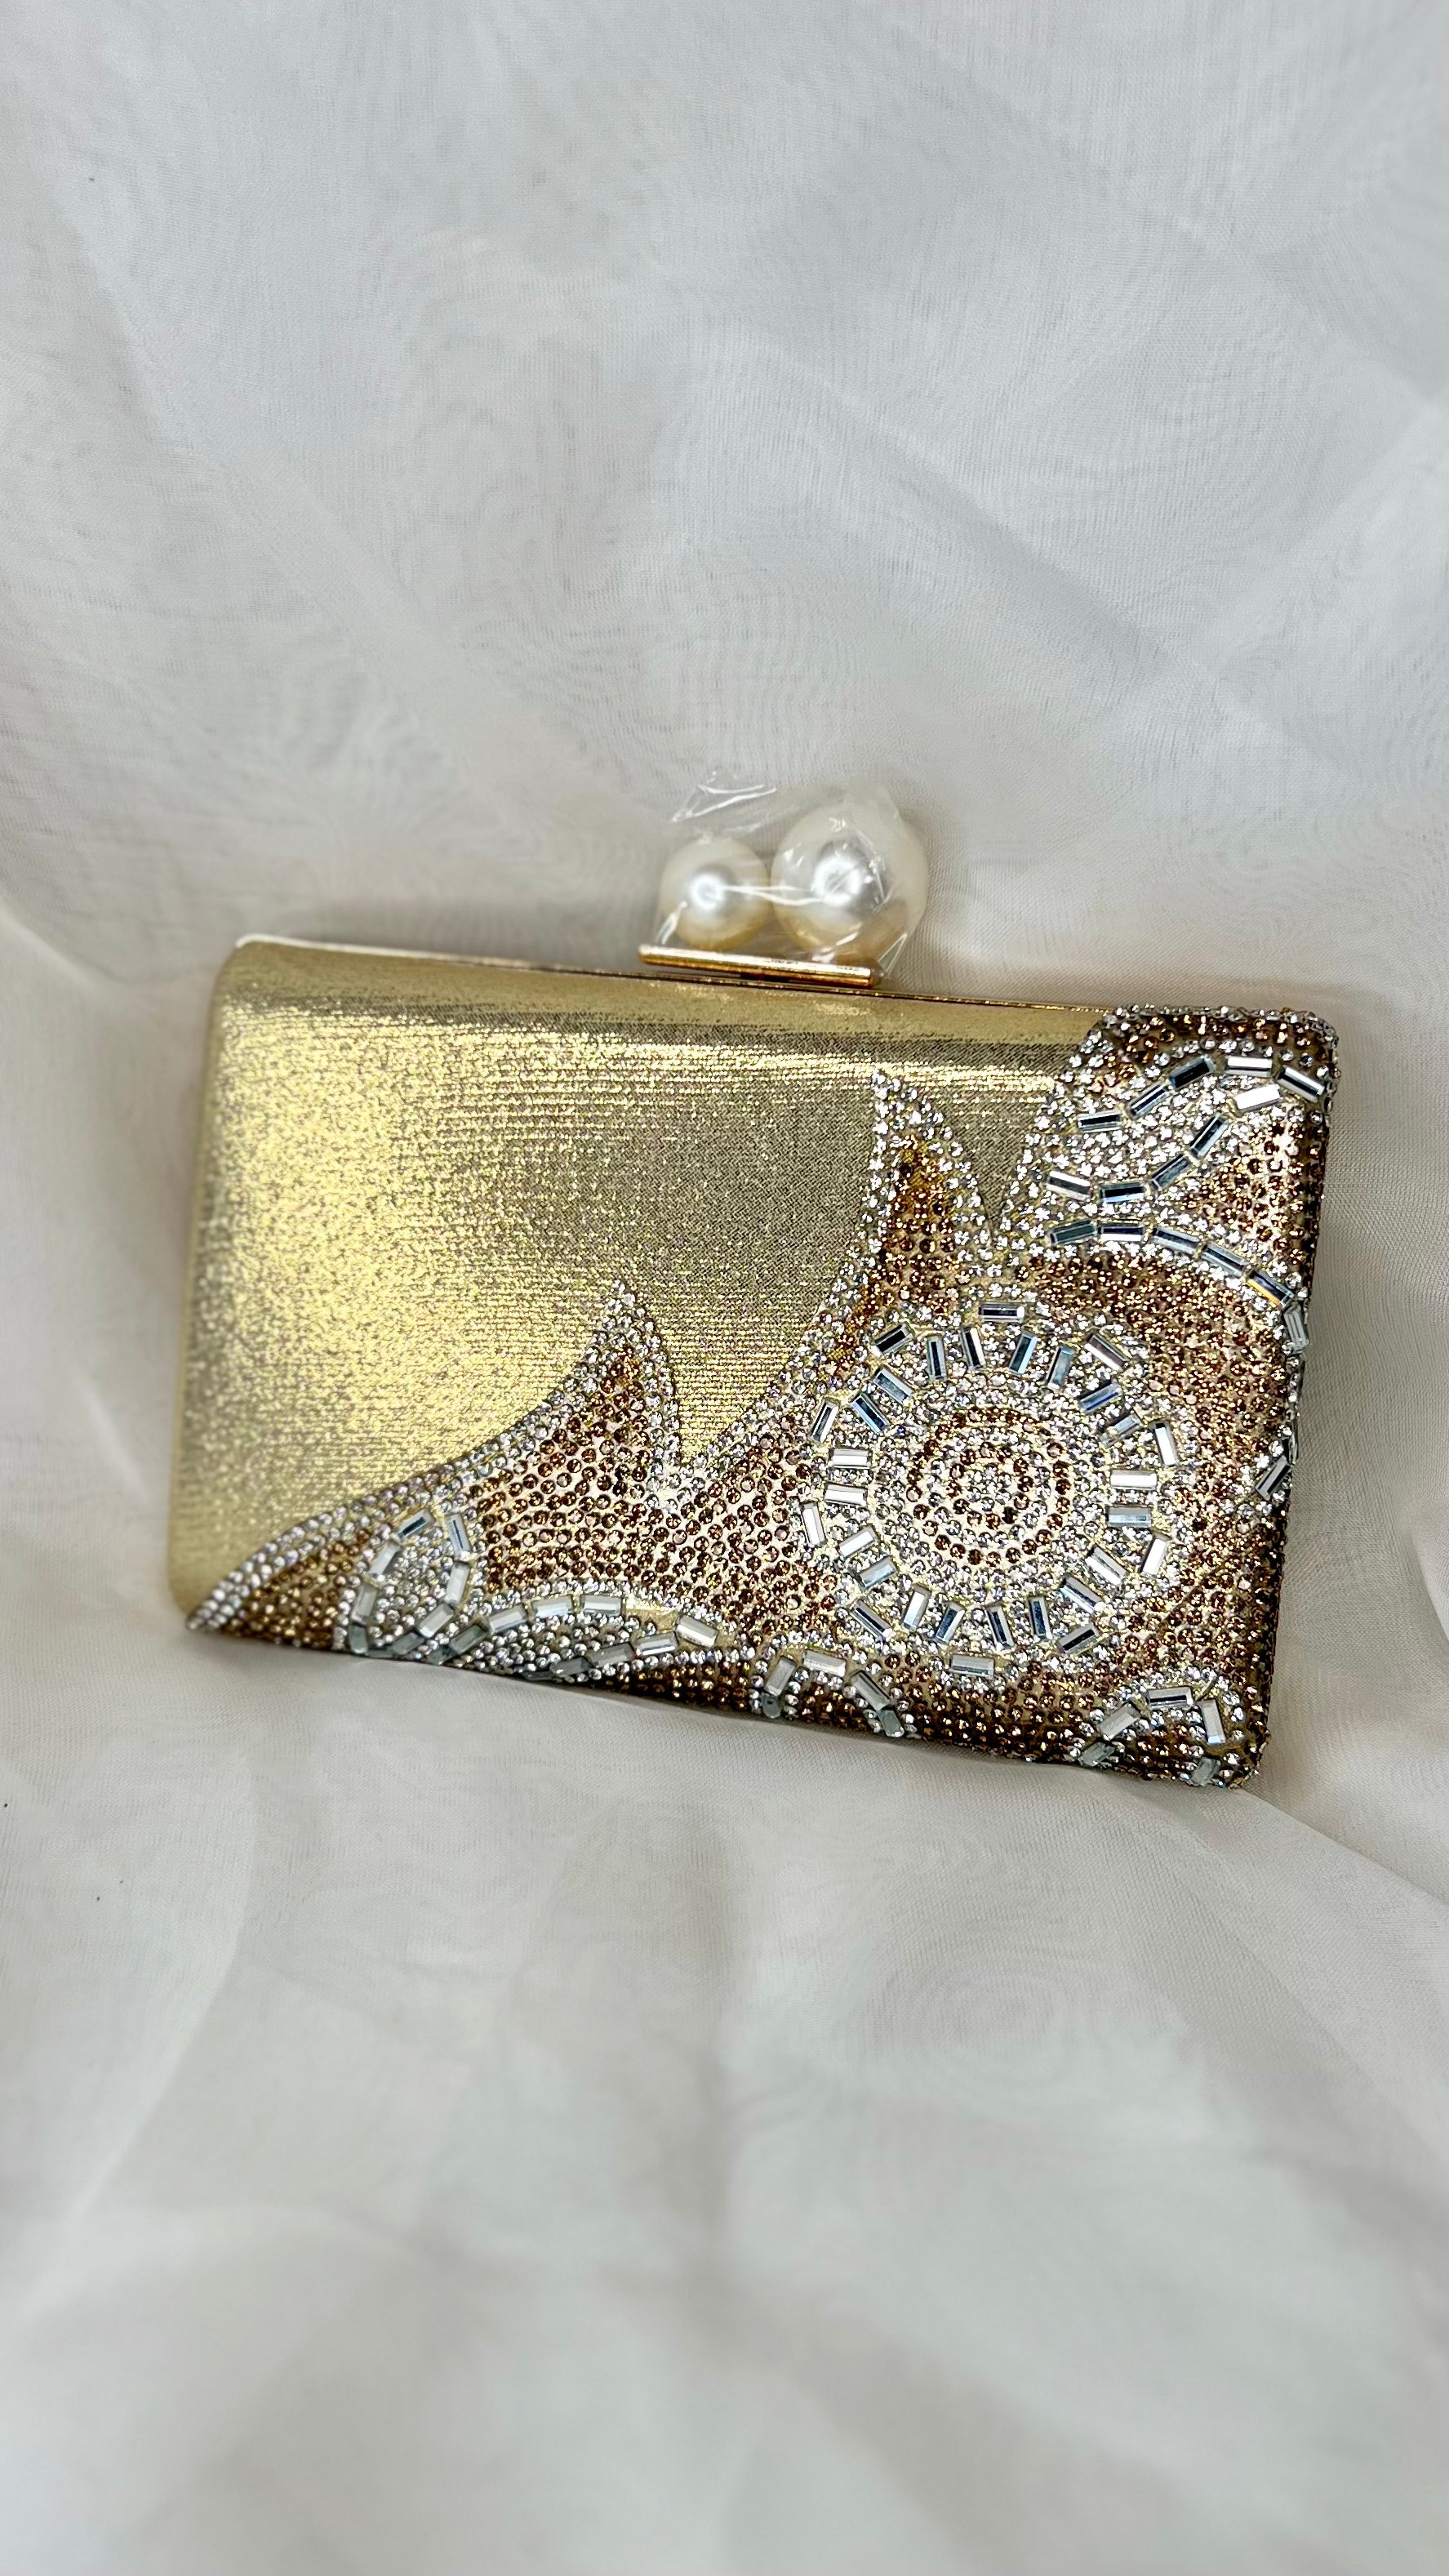 Baguette Evening Bag: Unusual and eye catching, this convertible clutch bag is also lovely to hold.
Dimensions: W 17cm X D 4.5cm X H 11.5cm
Handle Drop: Gold link chain extends to 116cm,  - Ciao Bella Dresses 